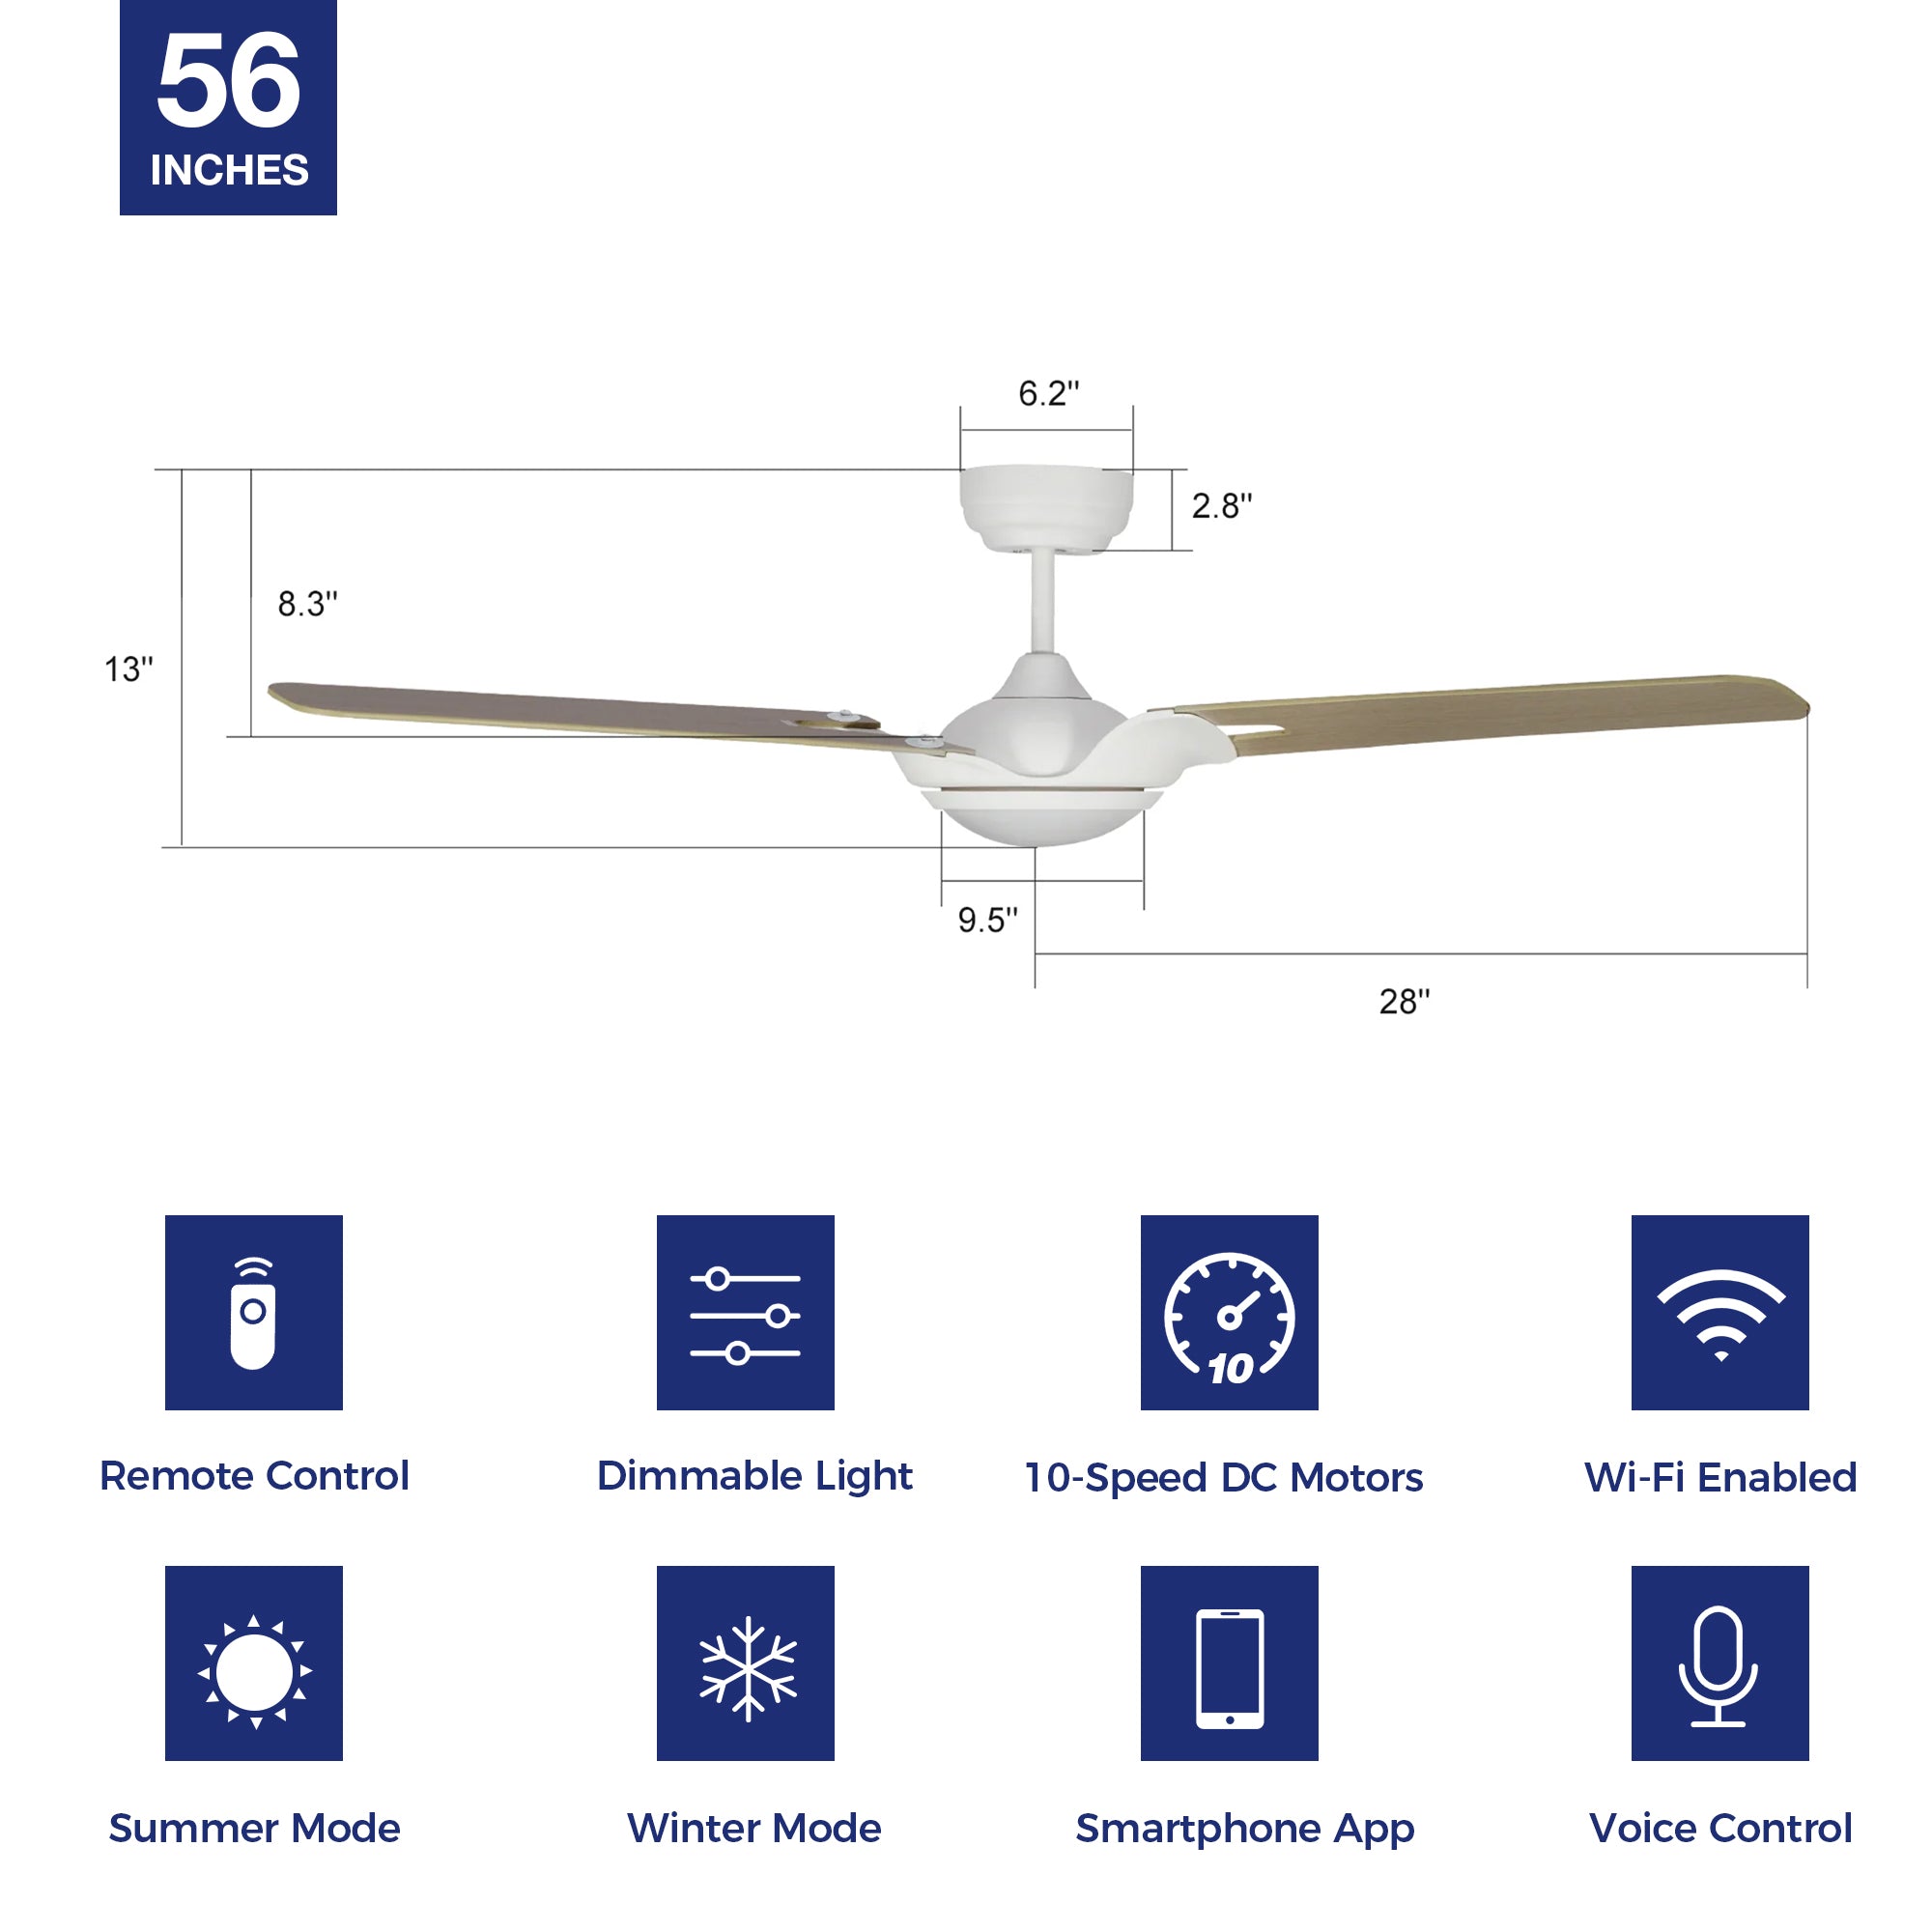 Innovator Outdoor 56&quot; Smart Ceiling Fan with LED Light Kit-White Base and light-color wood Pattern Fan Blades. The fan features Remote control, Wi-Fi apps, and Voice control technology (compatible with Amazon Alexa and Google Home Assistant ) to set fan preferences. Equipped with 1962-lumen LED lights and a 10-speed DC Motor (5800CFM airflow output), it brings you cool and bright. 